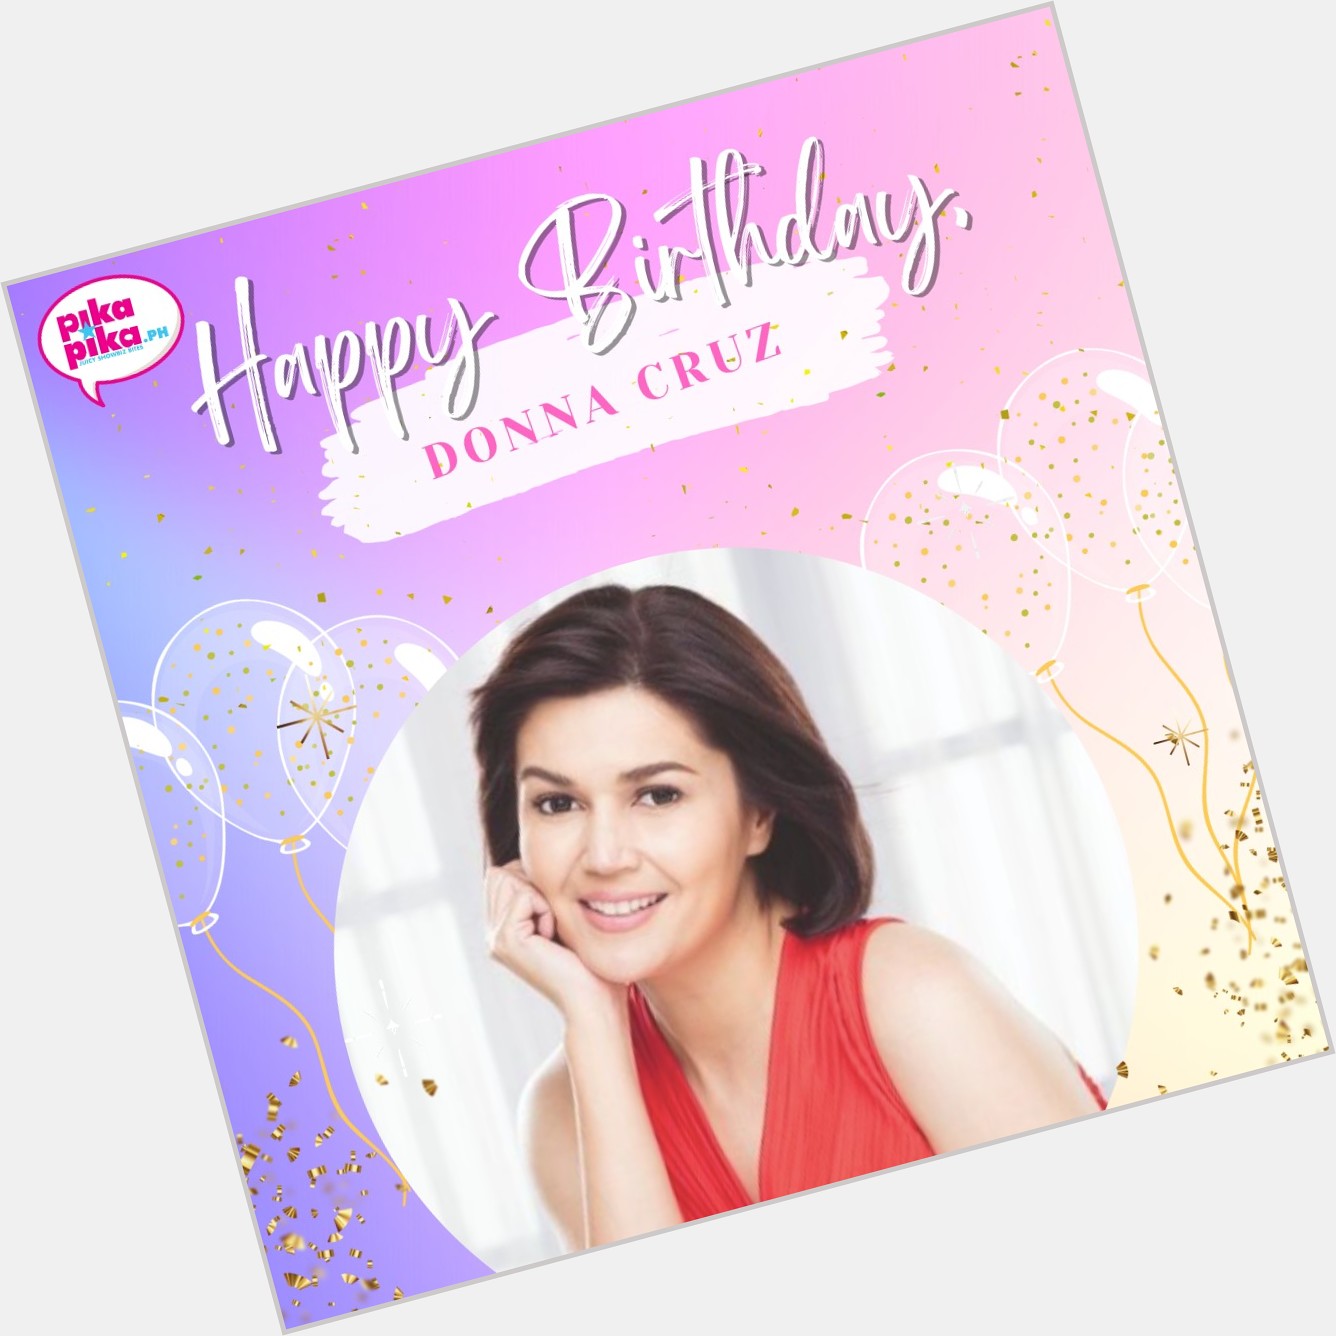 Happy birthday, Donna Cruz! May your special day be filled with love and cheers.   